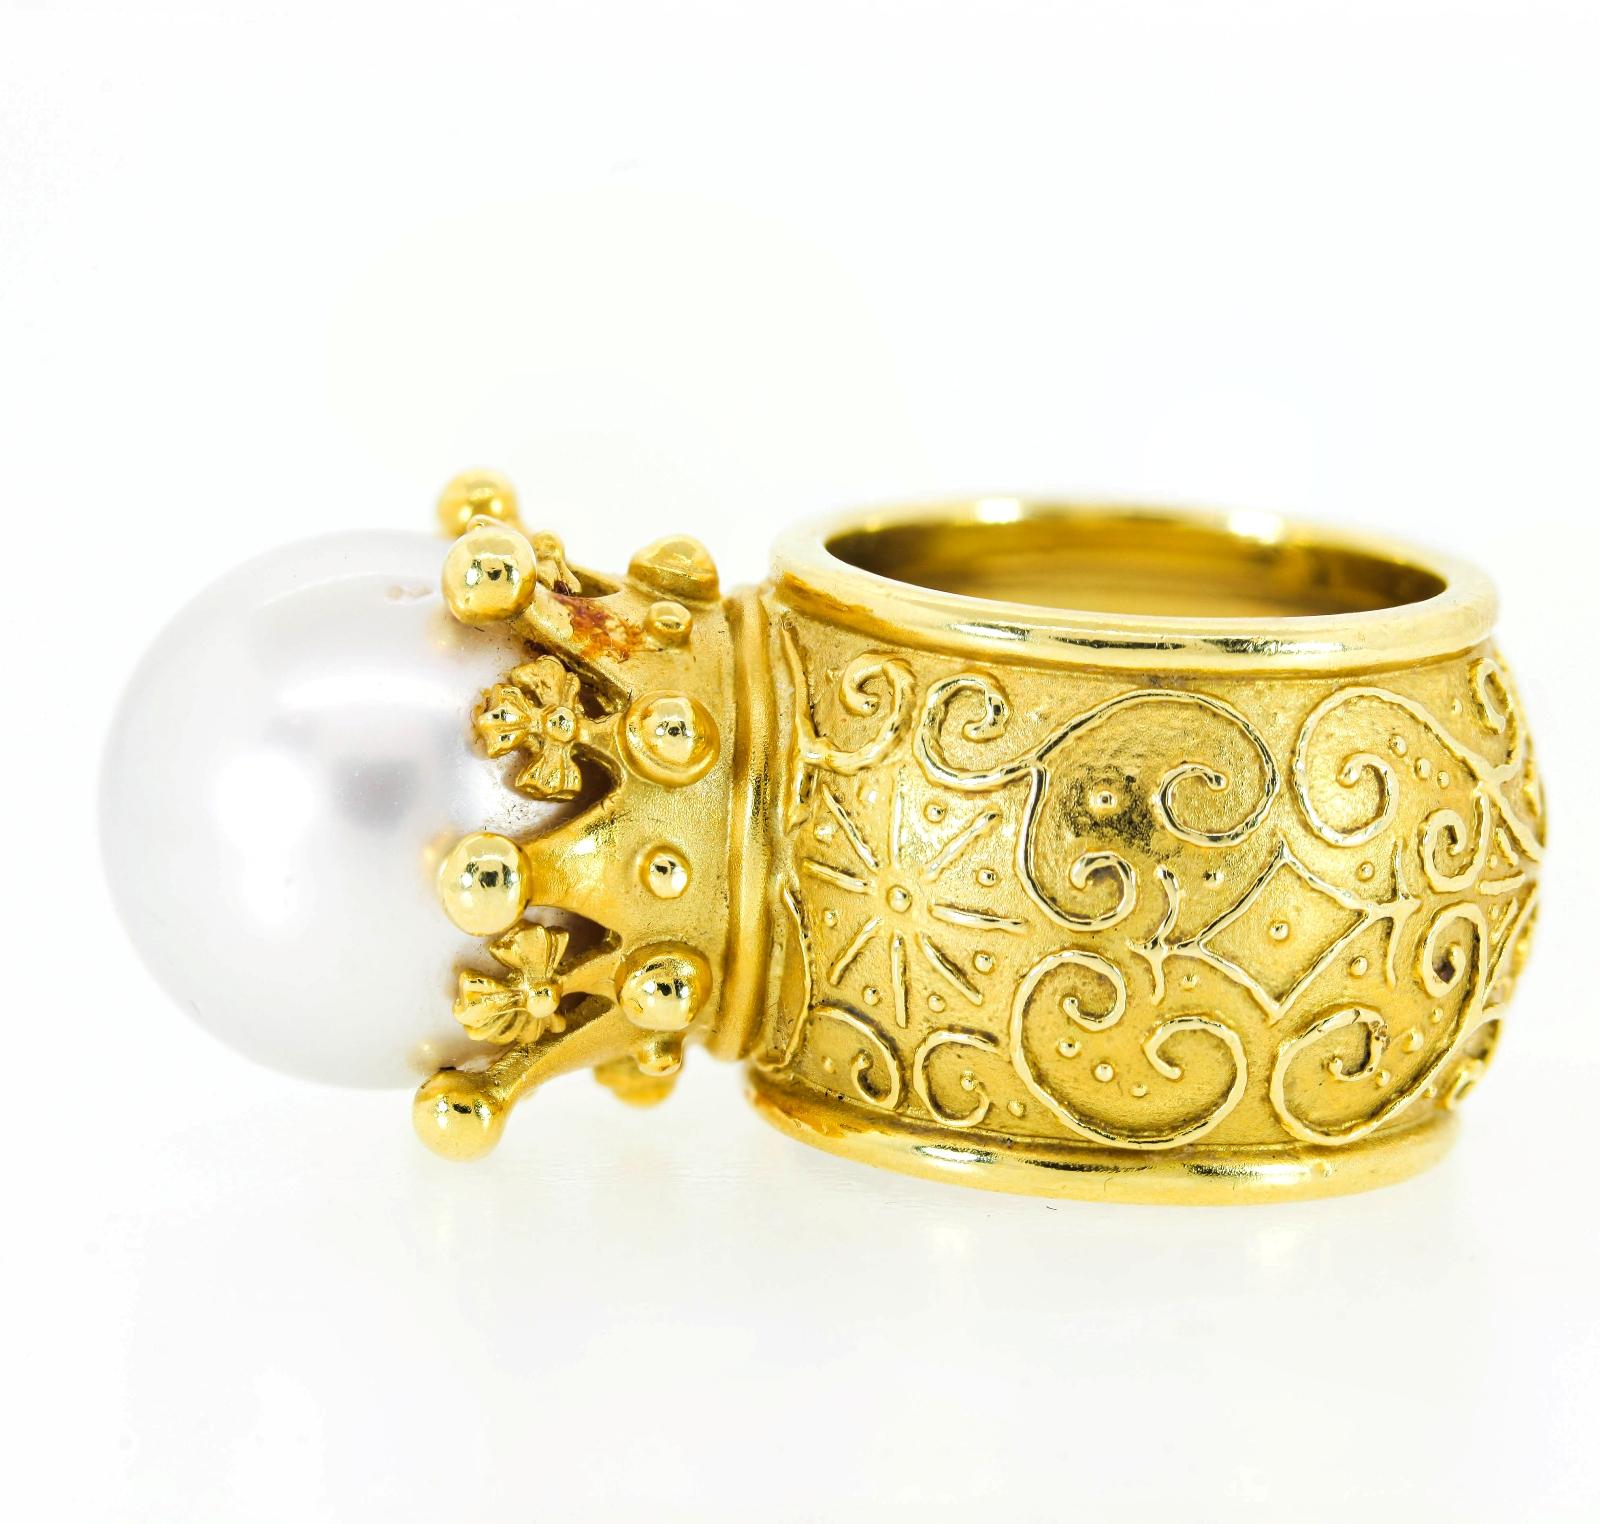 Neoclassical Cynthia Bach South Sea Pearl and Gold Ring